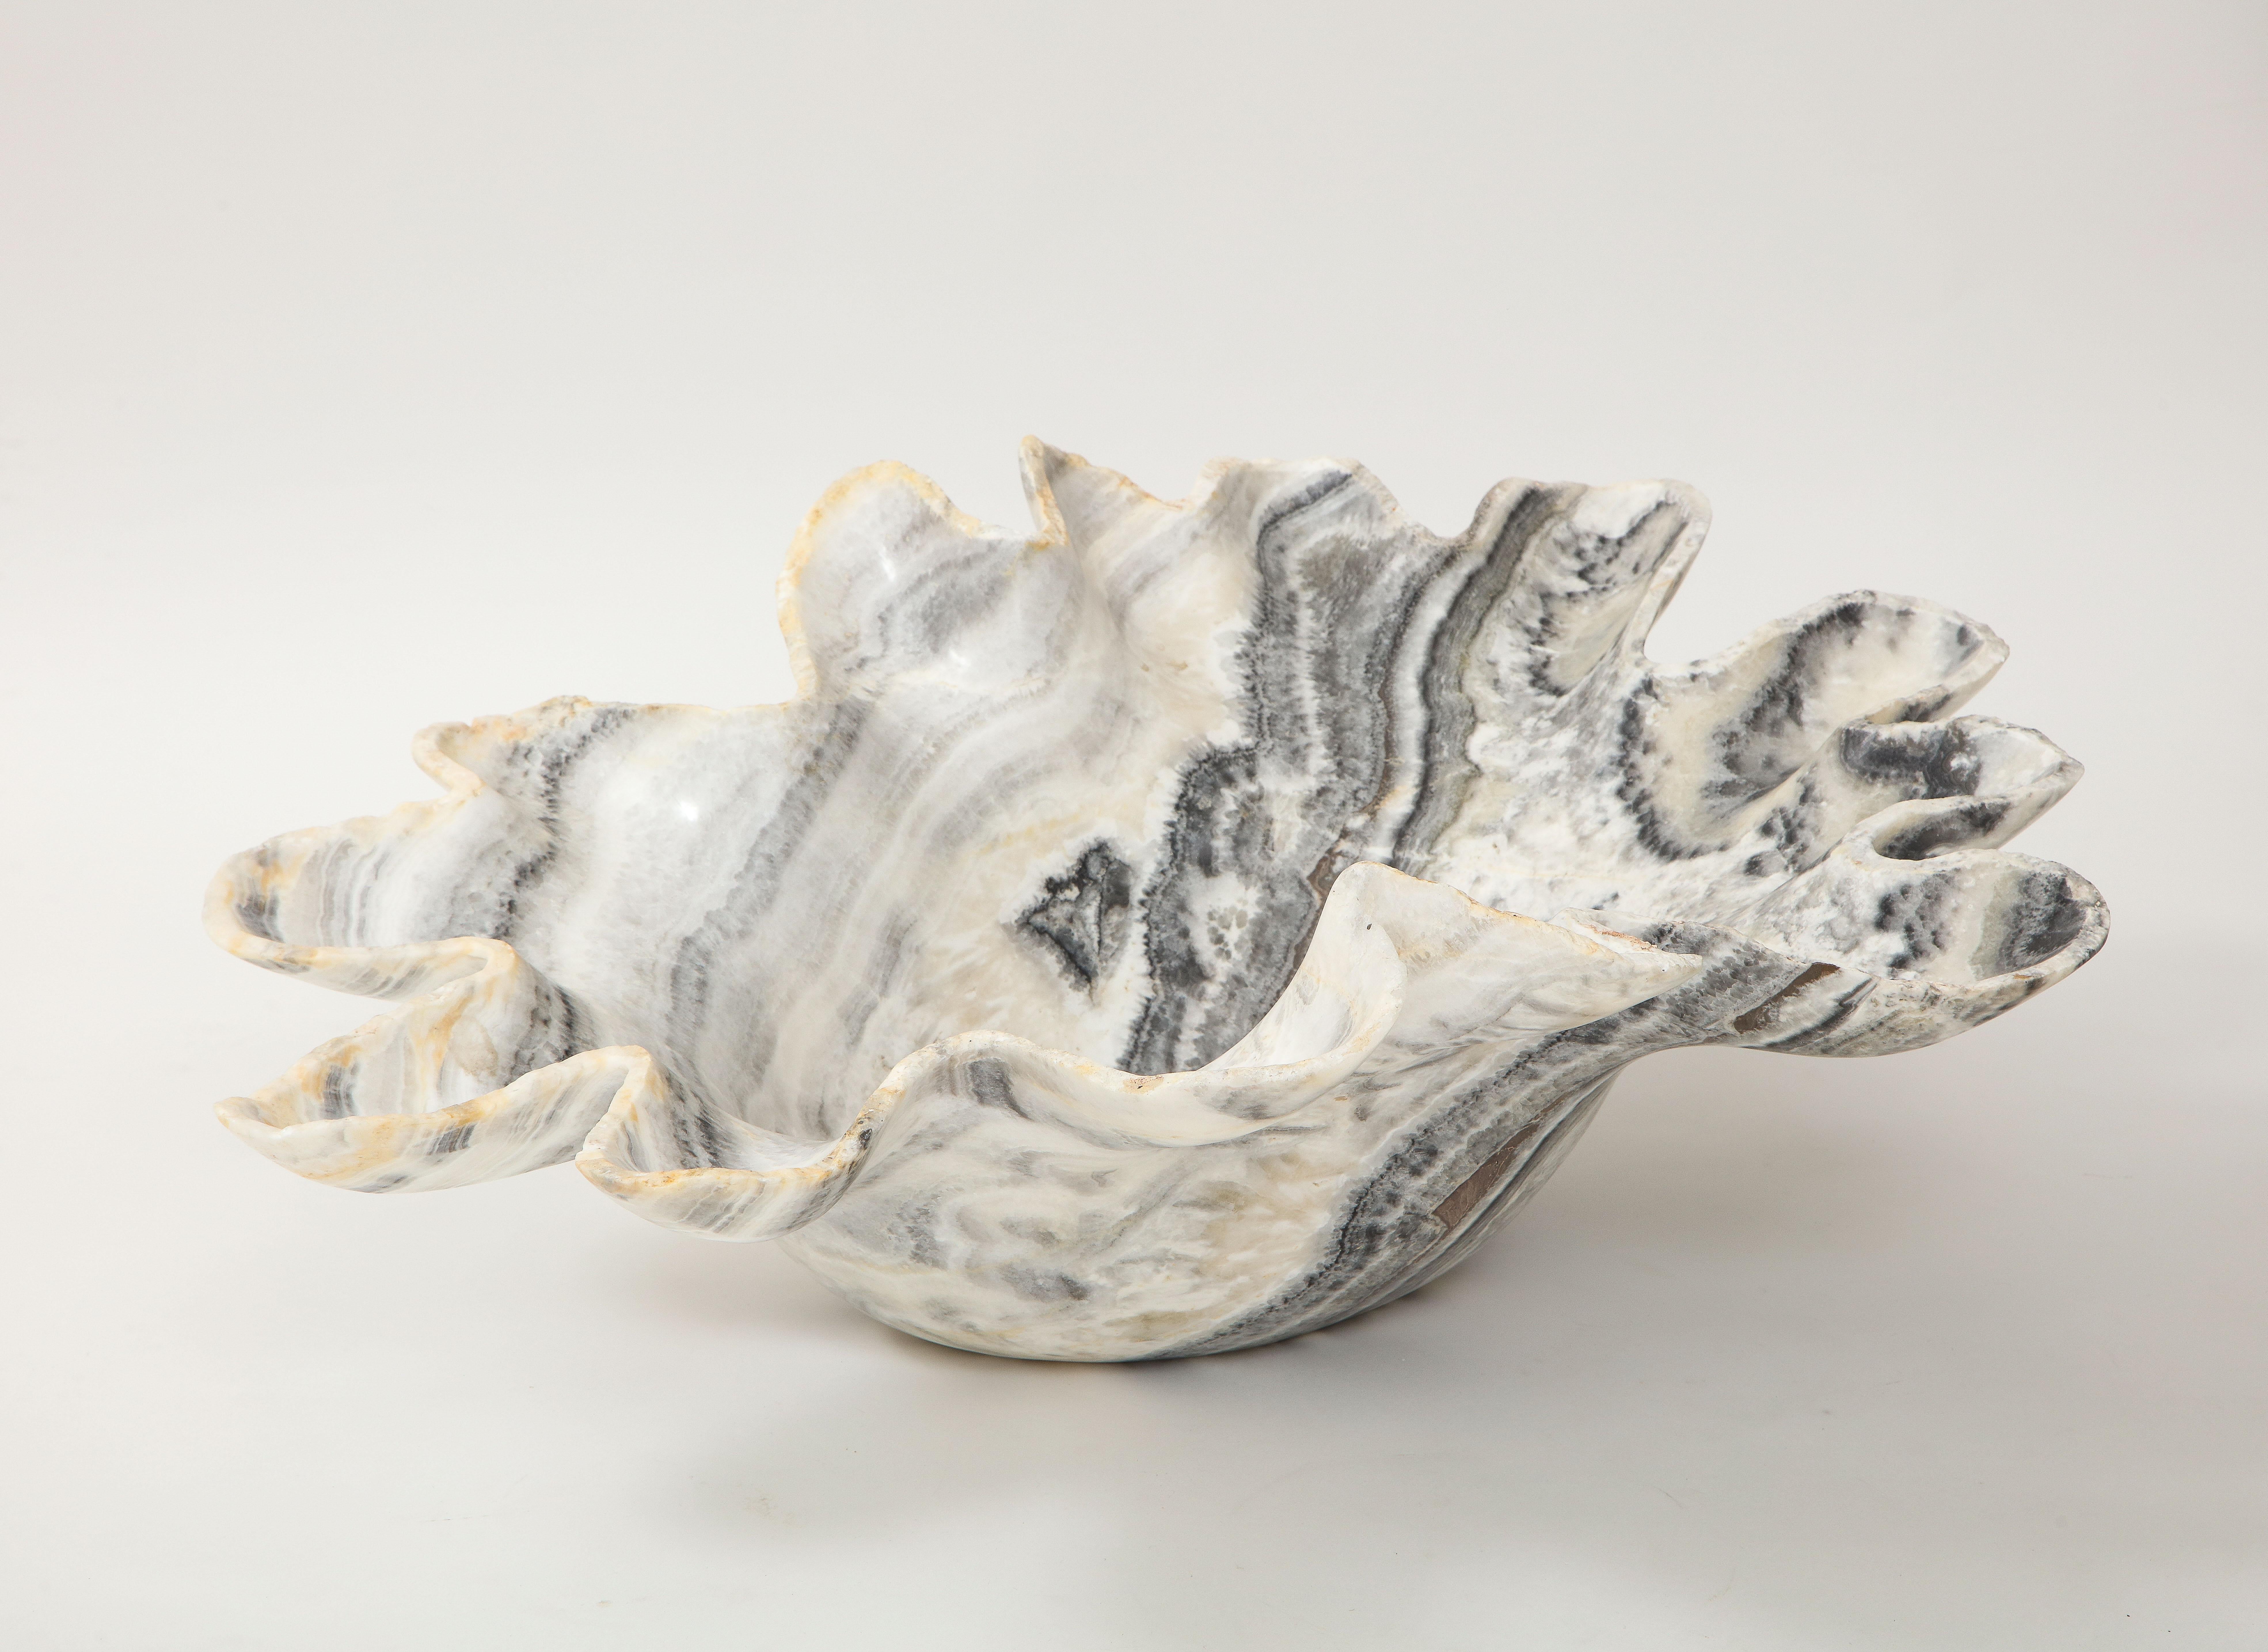 Post-Modern Monumental Sculptural White, Gray and Black Hand Carved Onyx Bowl or Centerpiece